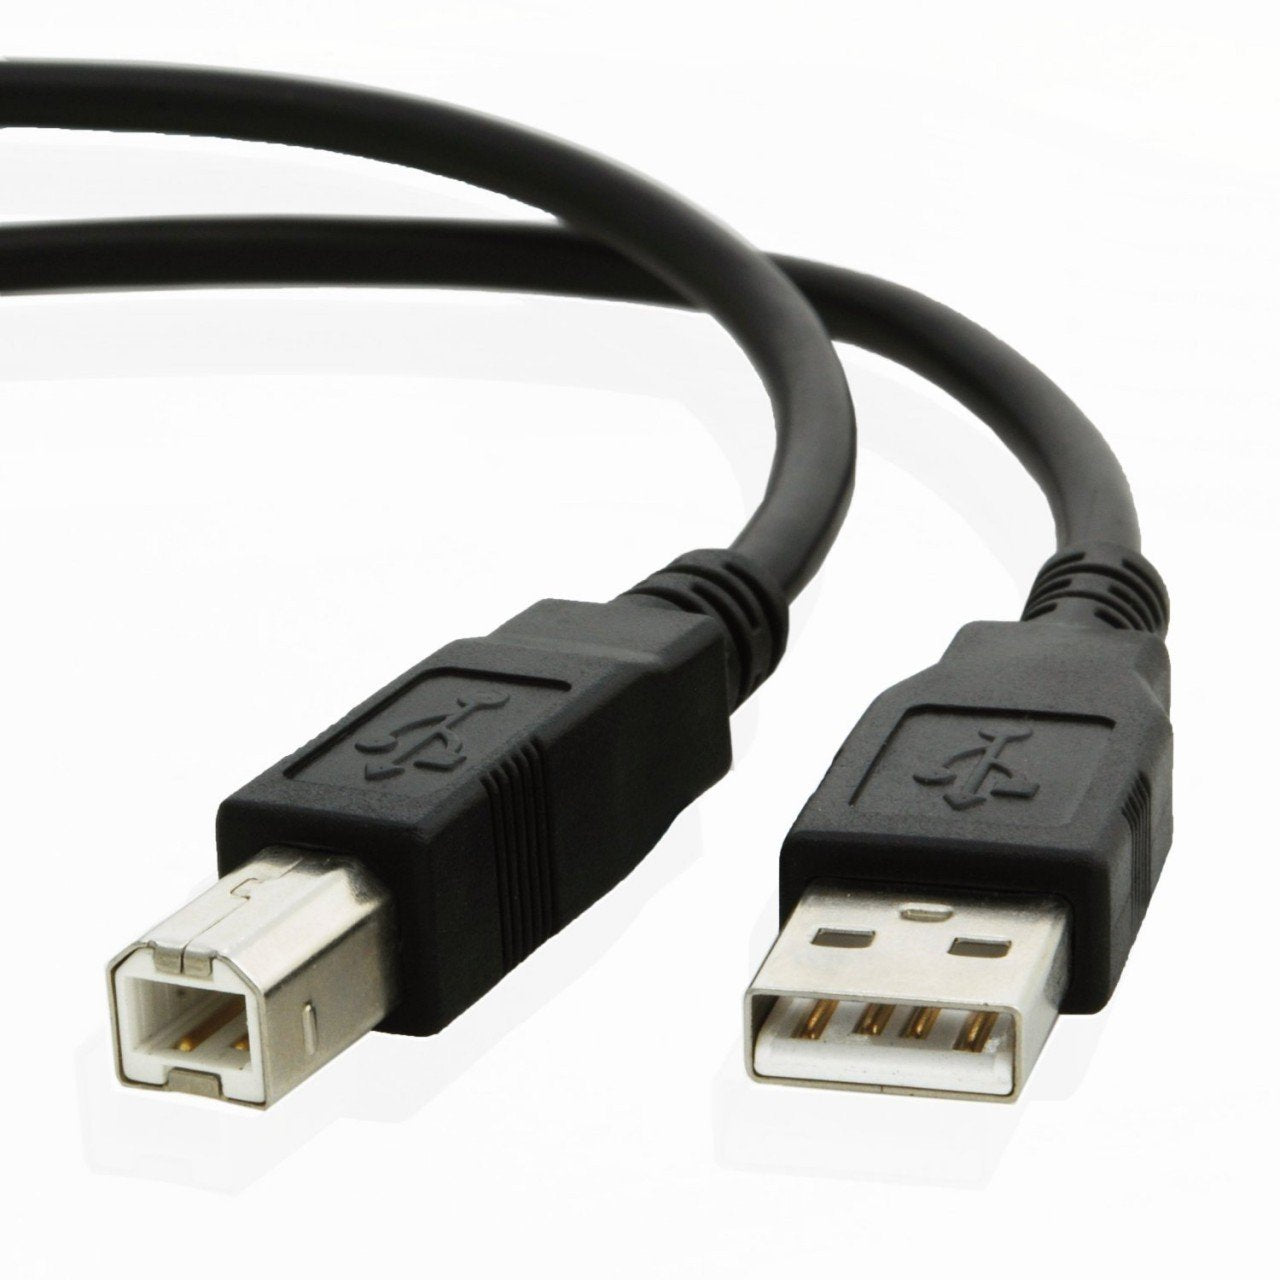 USB cable for Samson G-Track